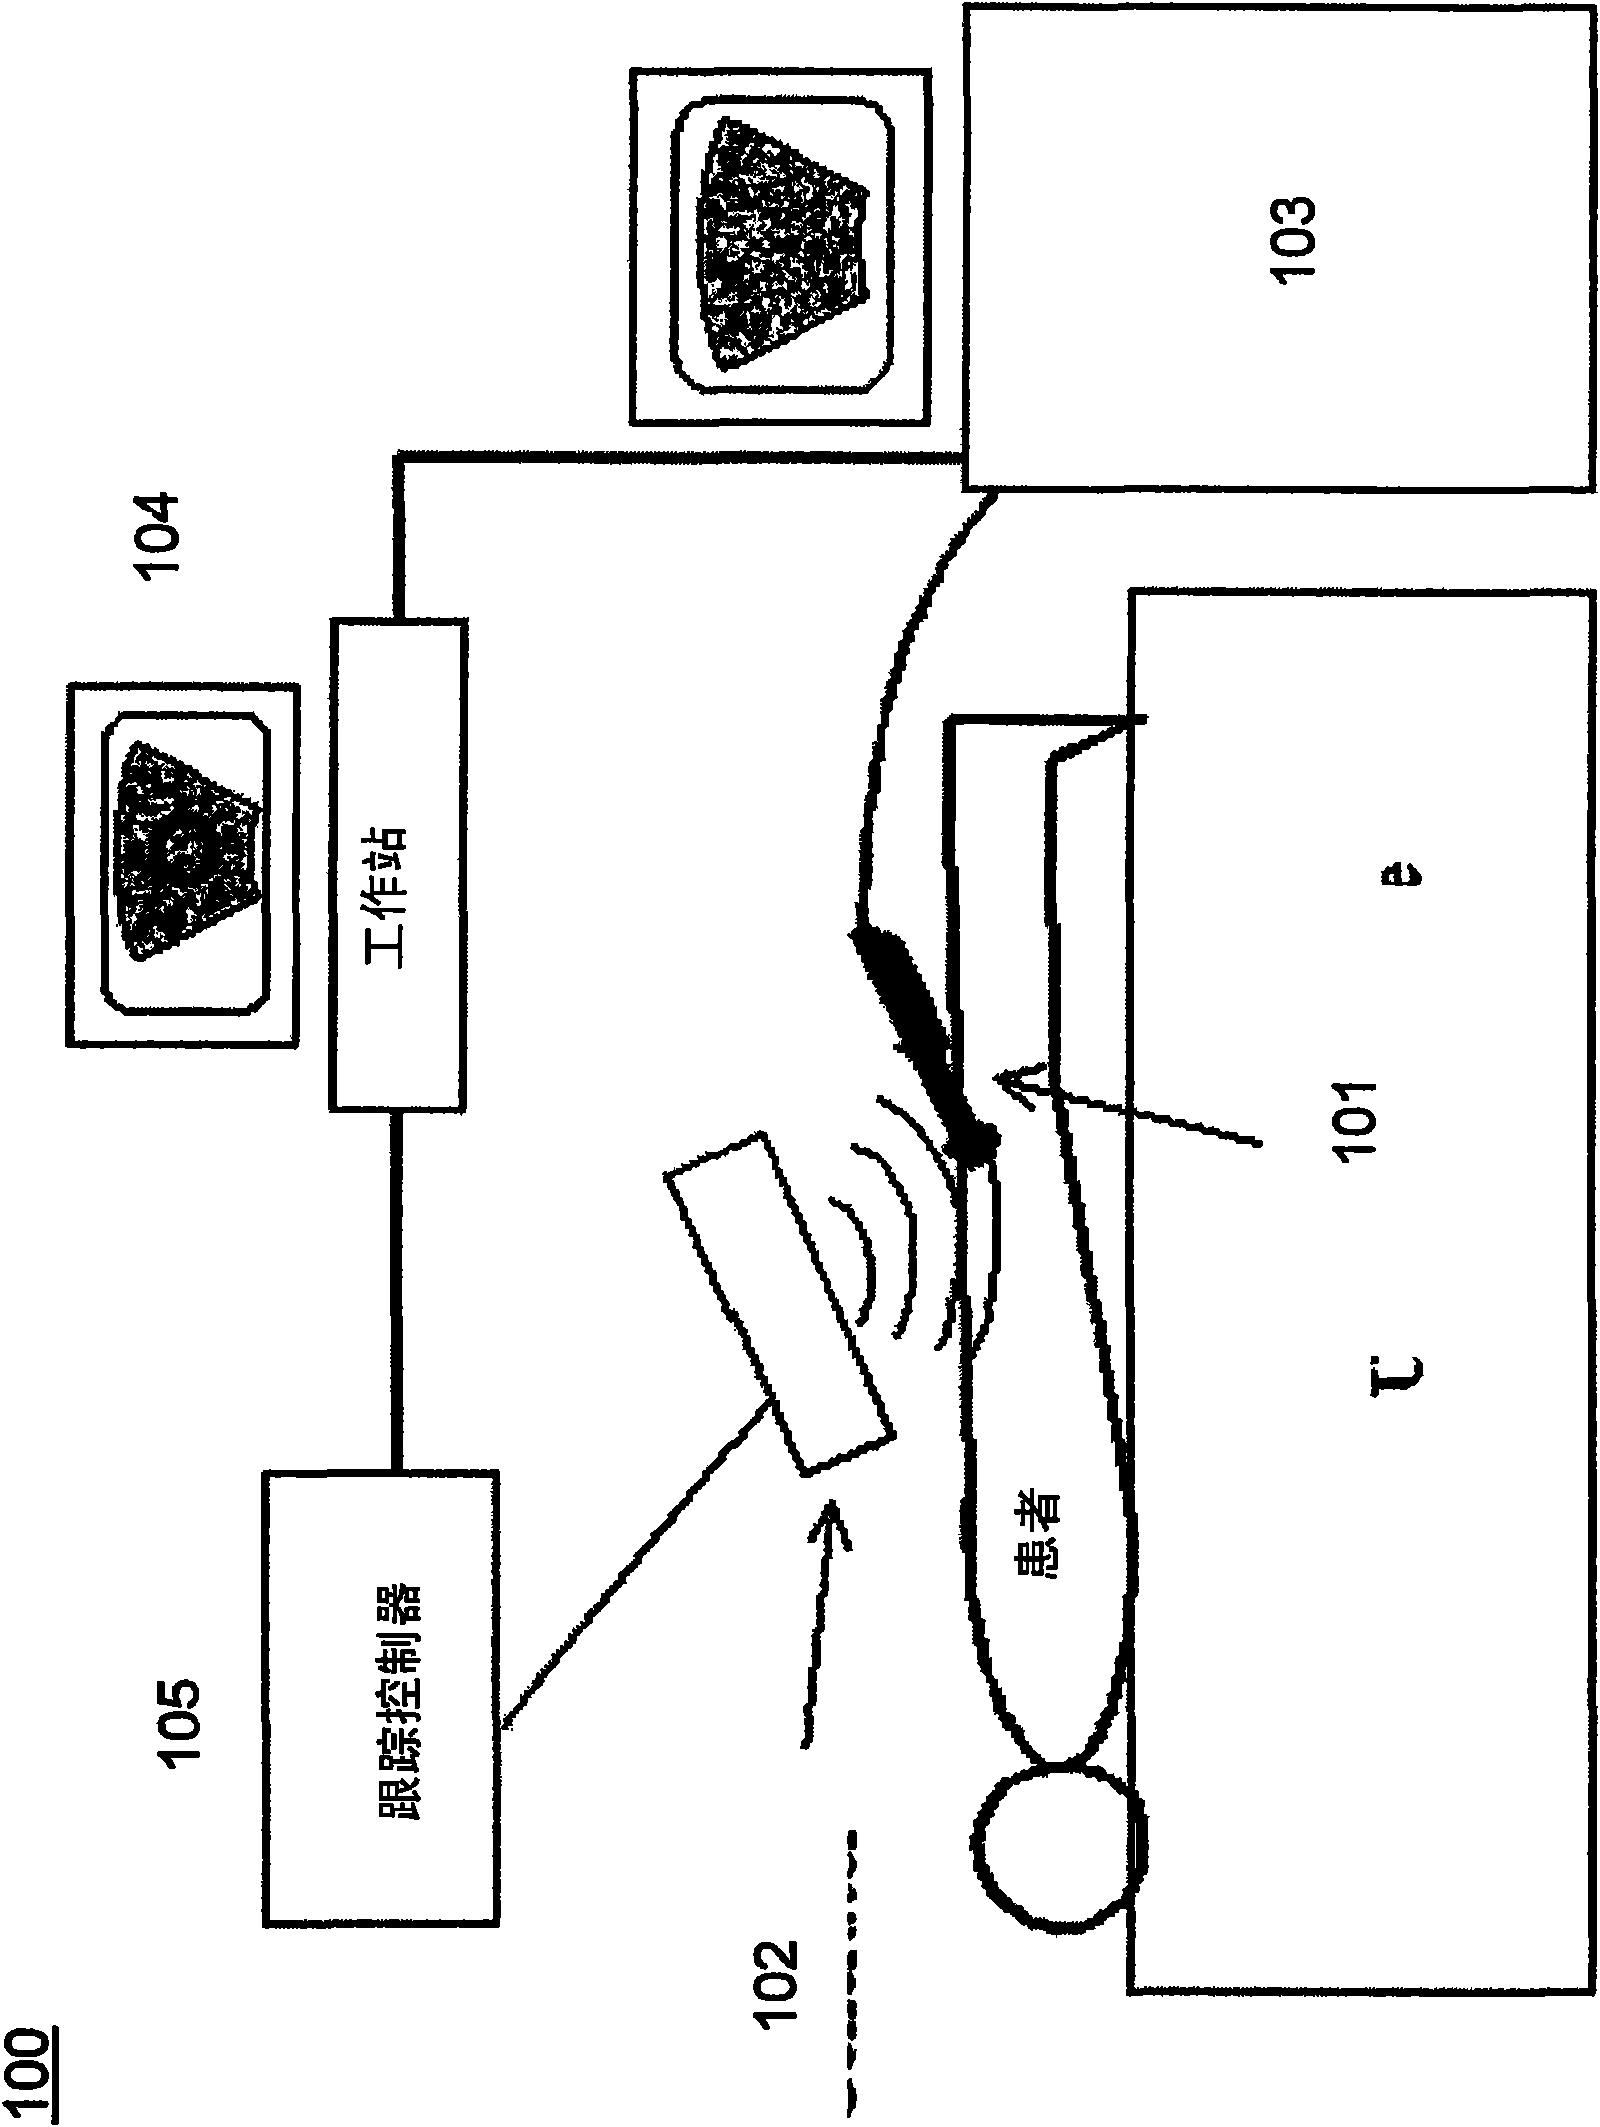 System and method for fusing real-time ultrasound images with pre-acquired medical images